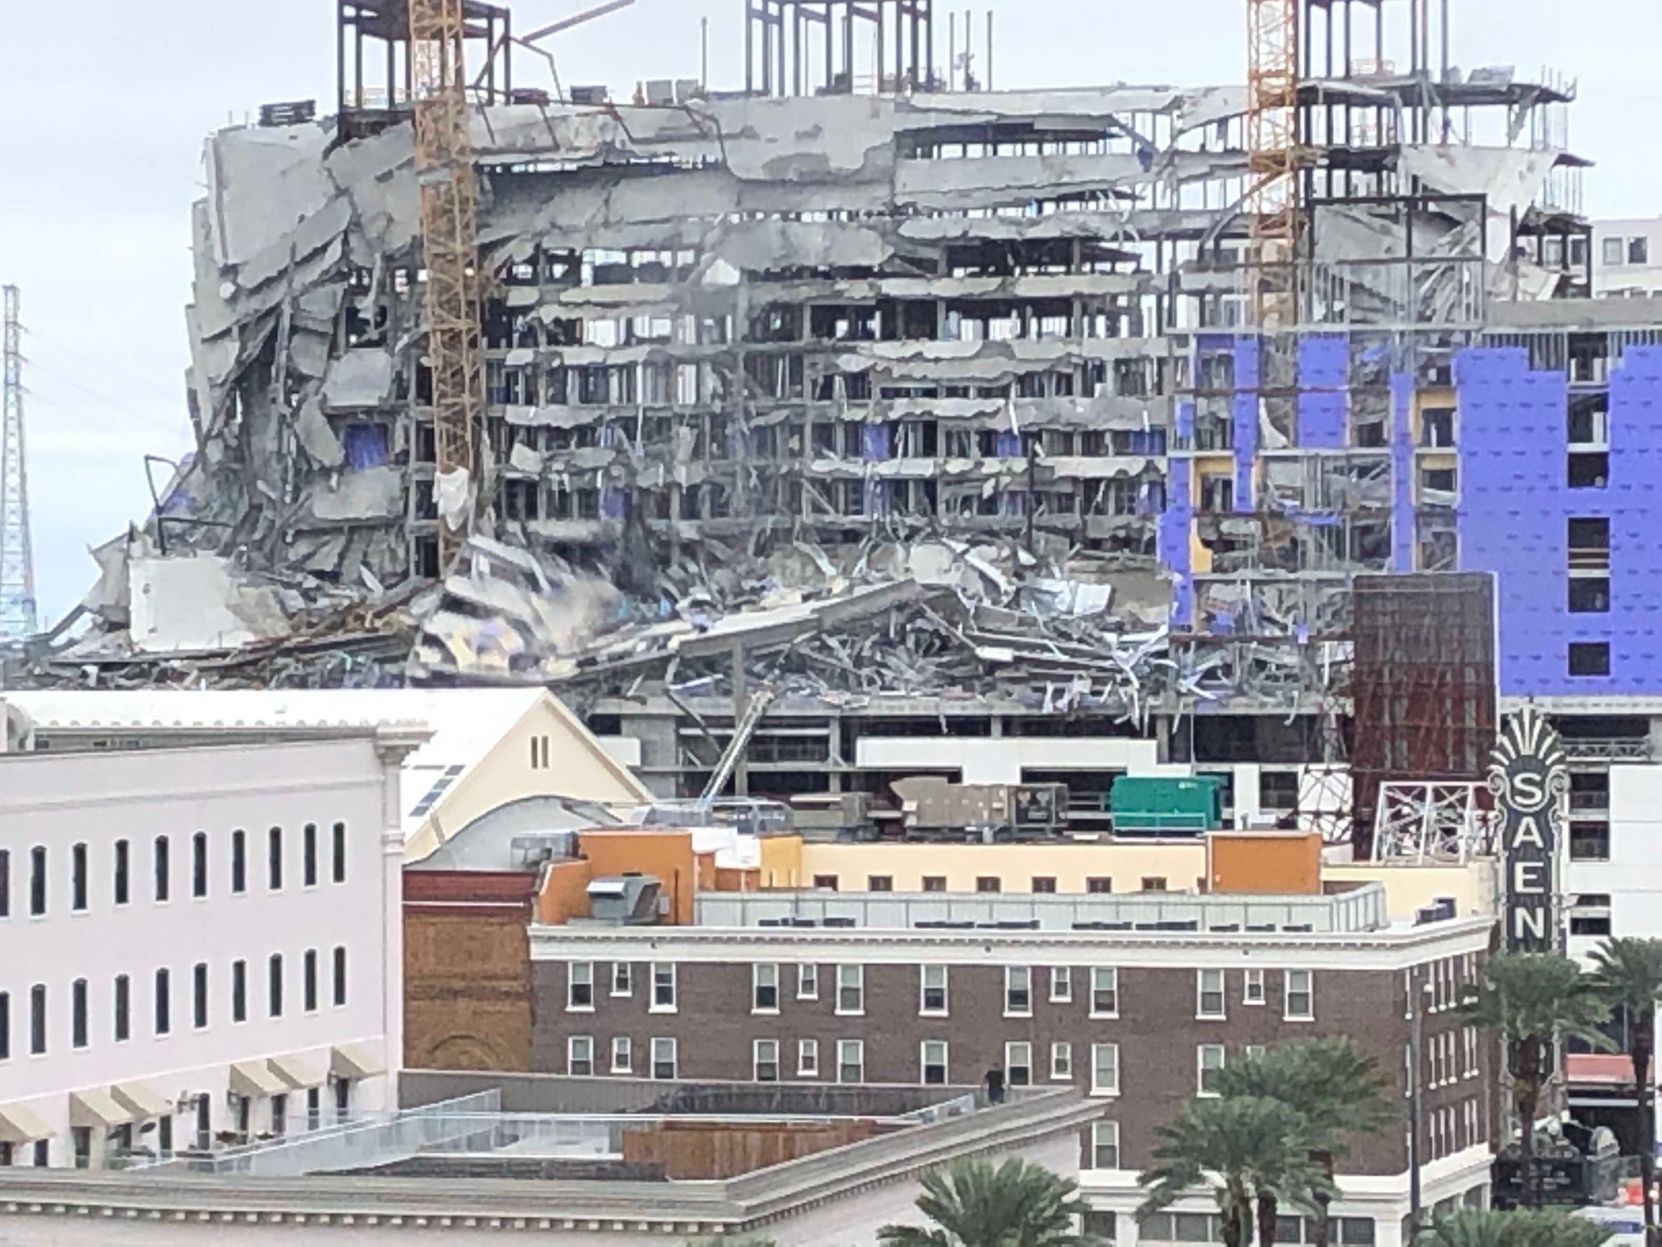 hard rock casino new orleans completion date